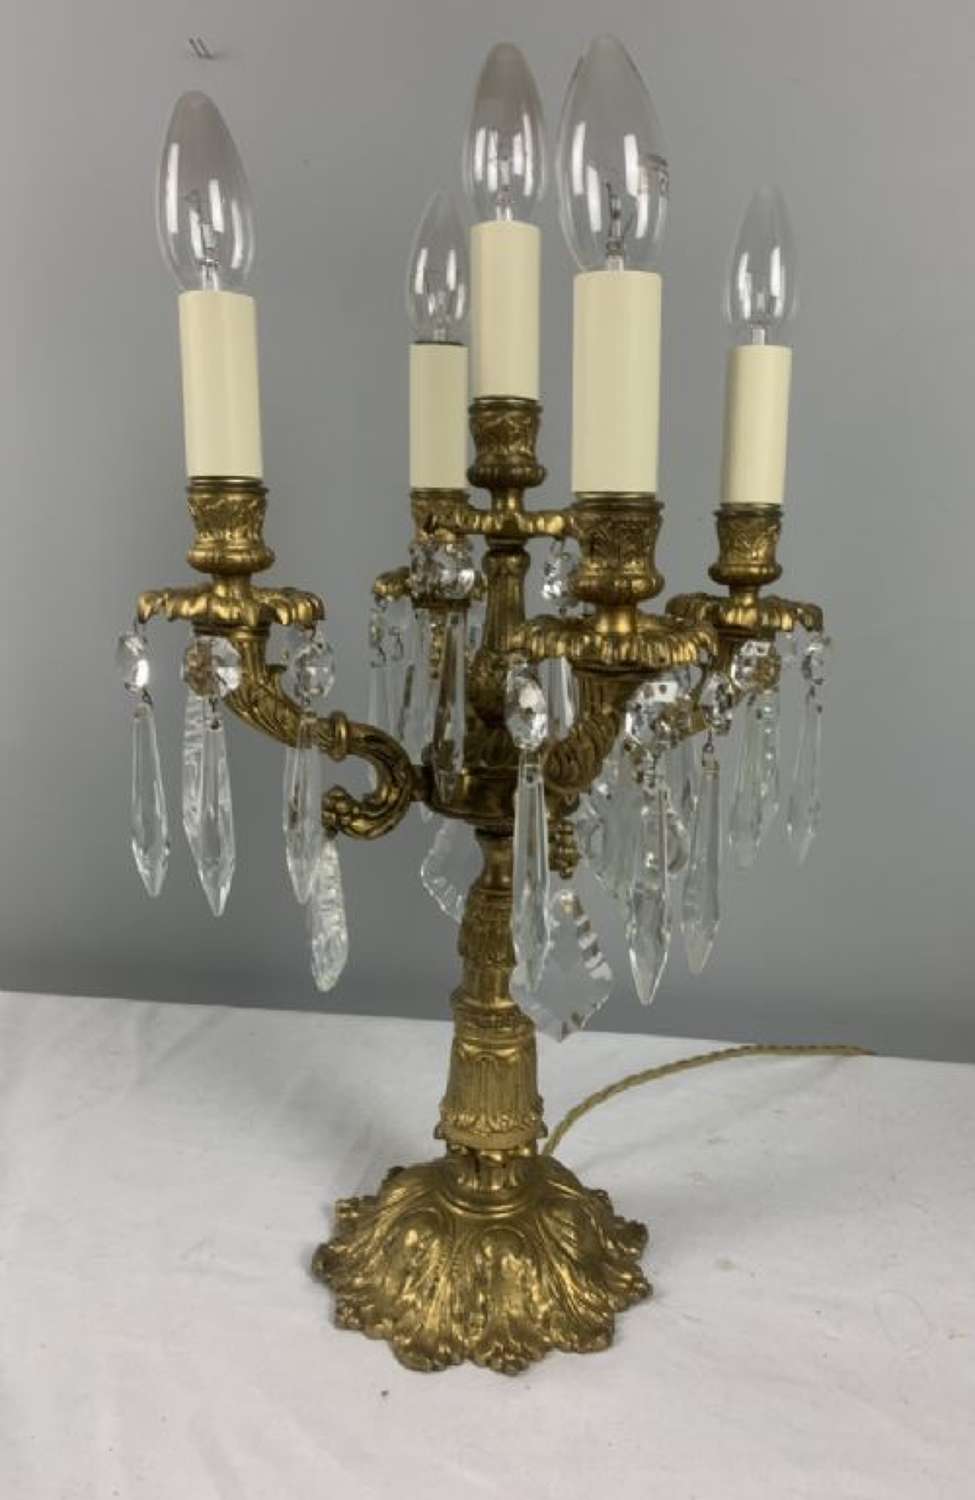 French 5 Light Gilt Brass Candelabra, Table Lamp, Rewired And Pat Test